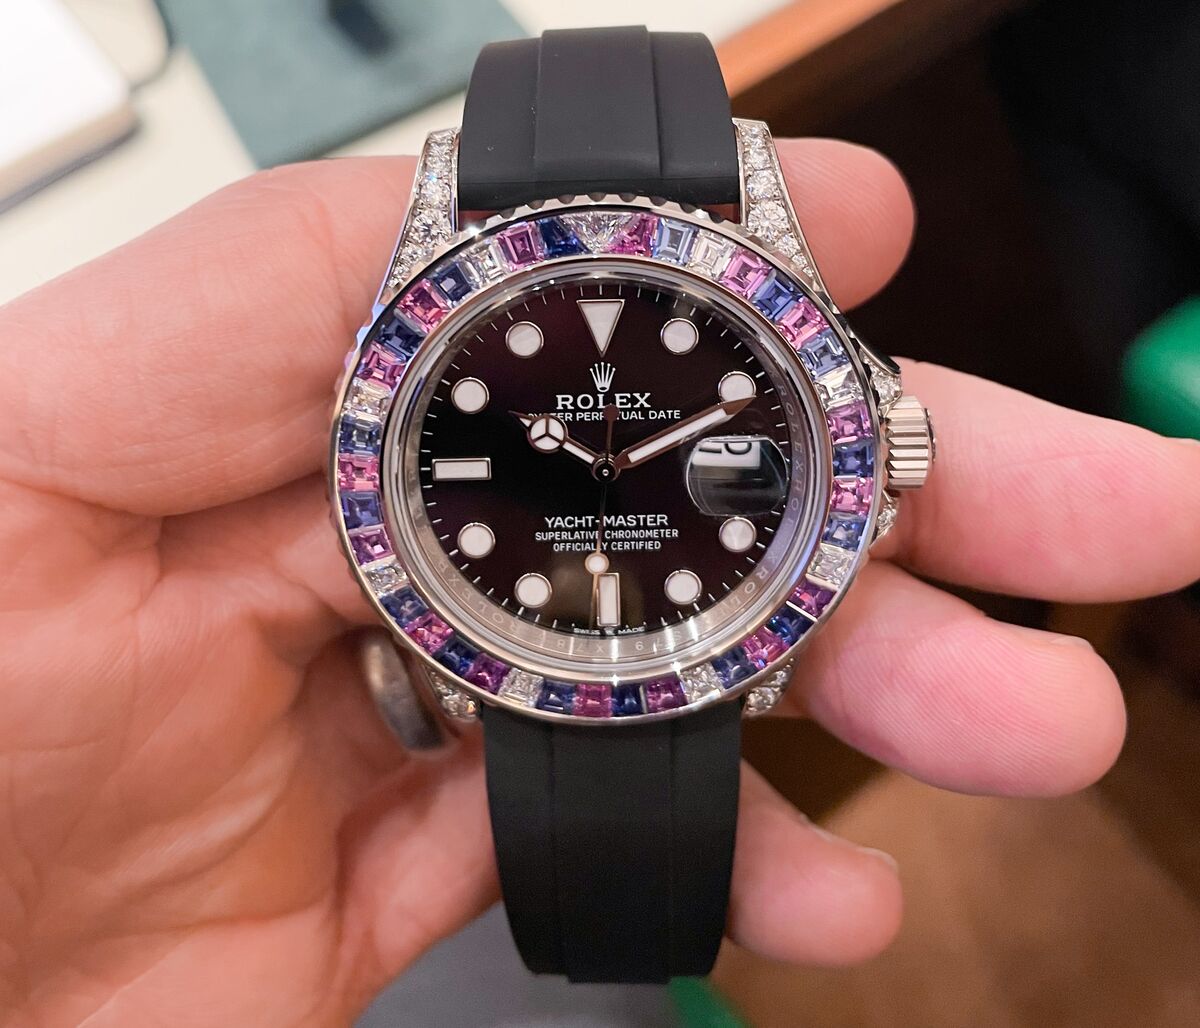 Louis Vuitton Has a Bunch Of Dope Watches Arriving in 2019 - The Source